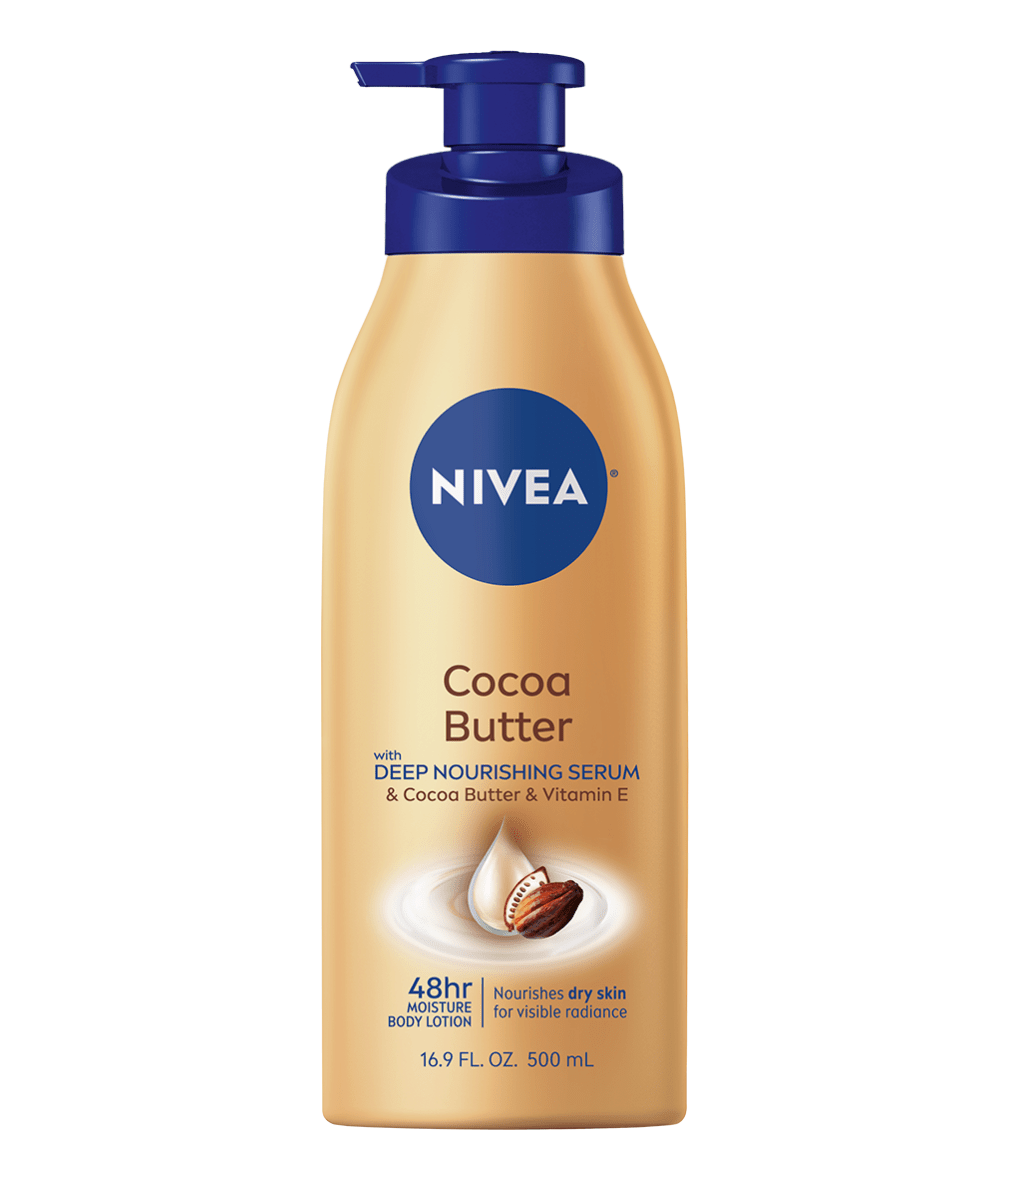 Working With Shea Butter – Essentially Natural